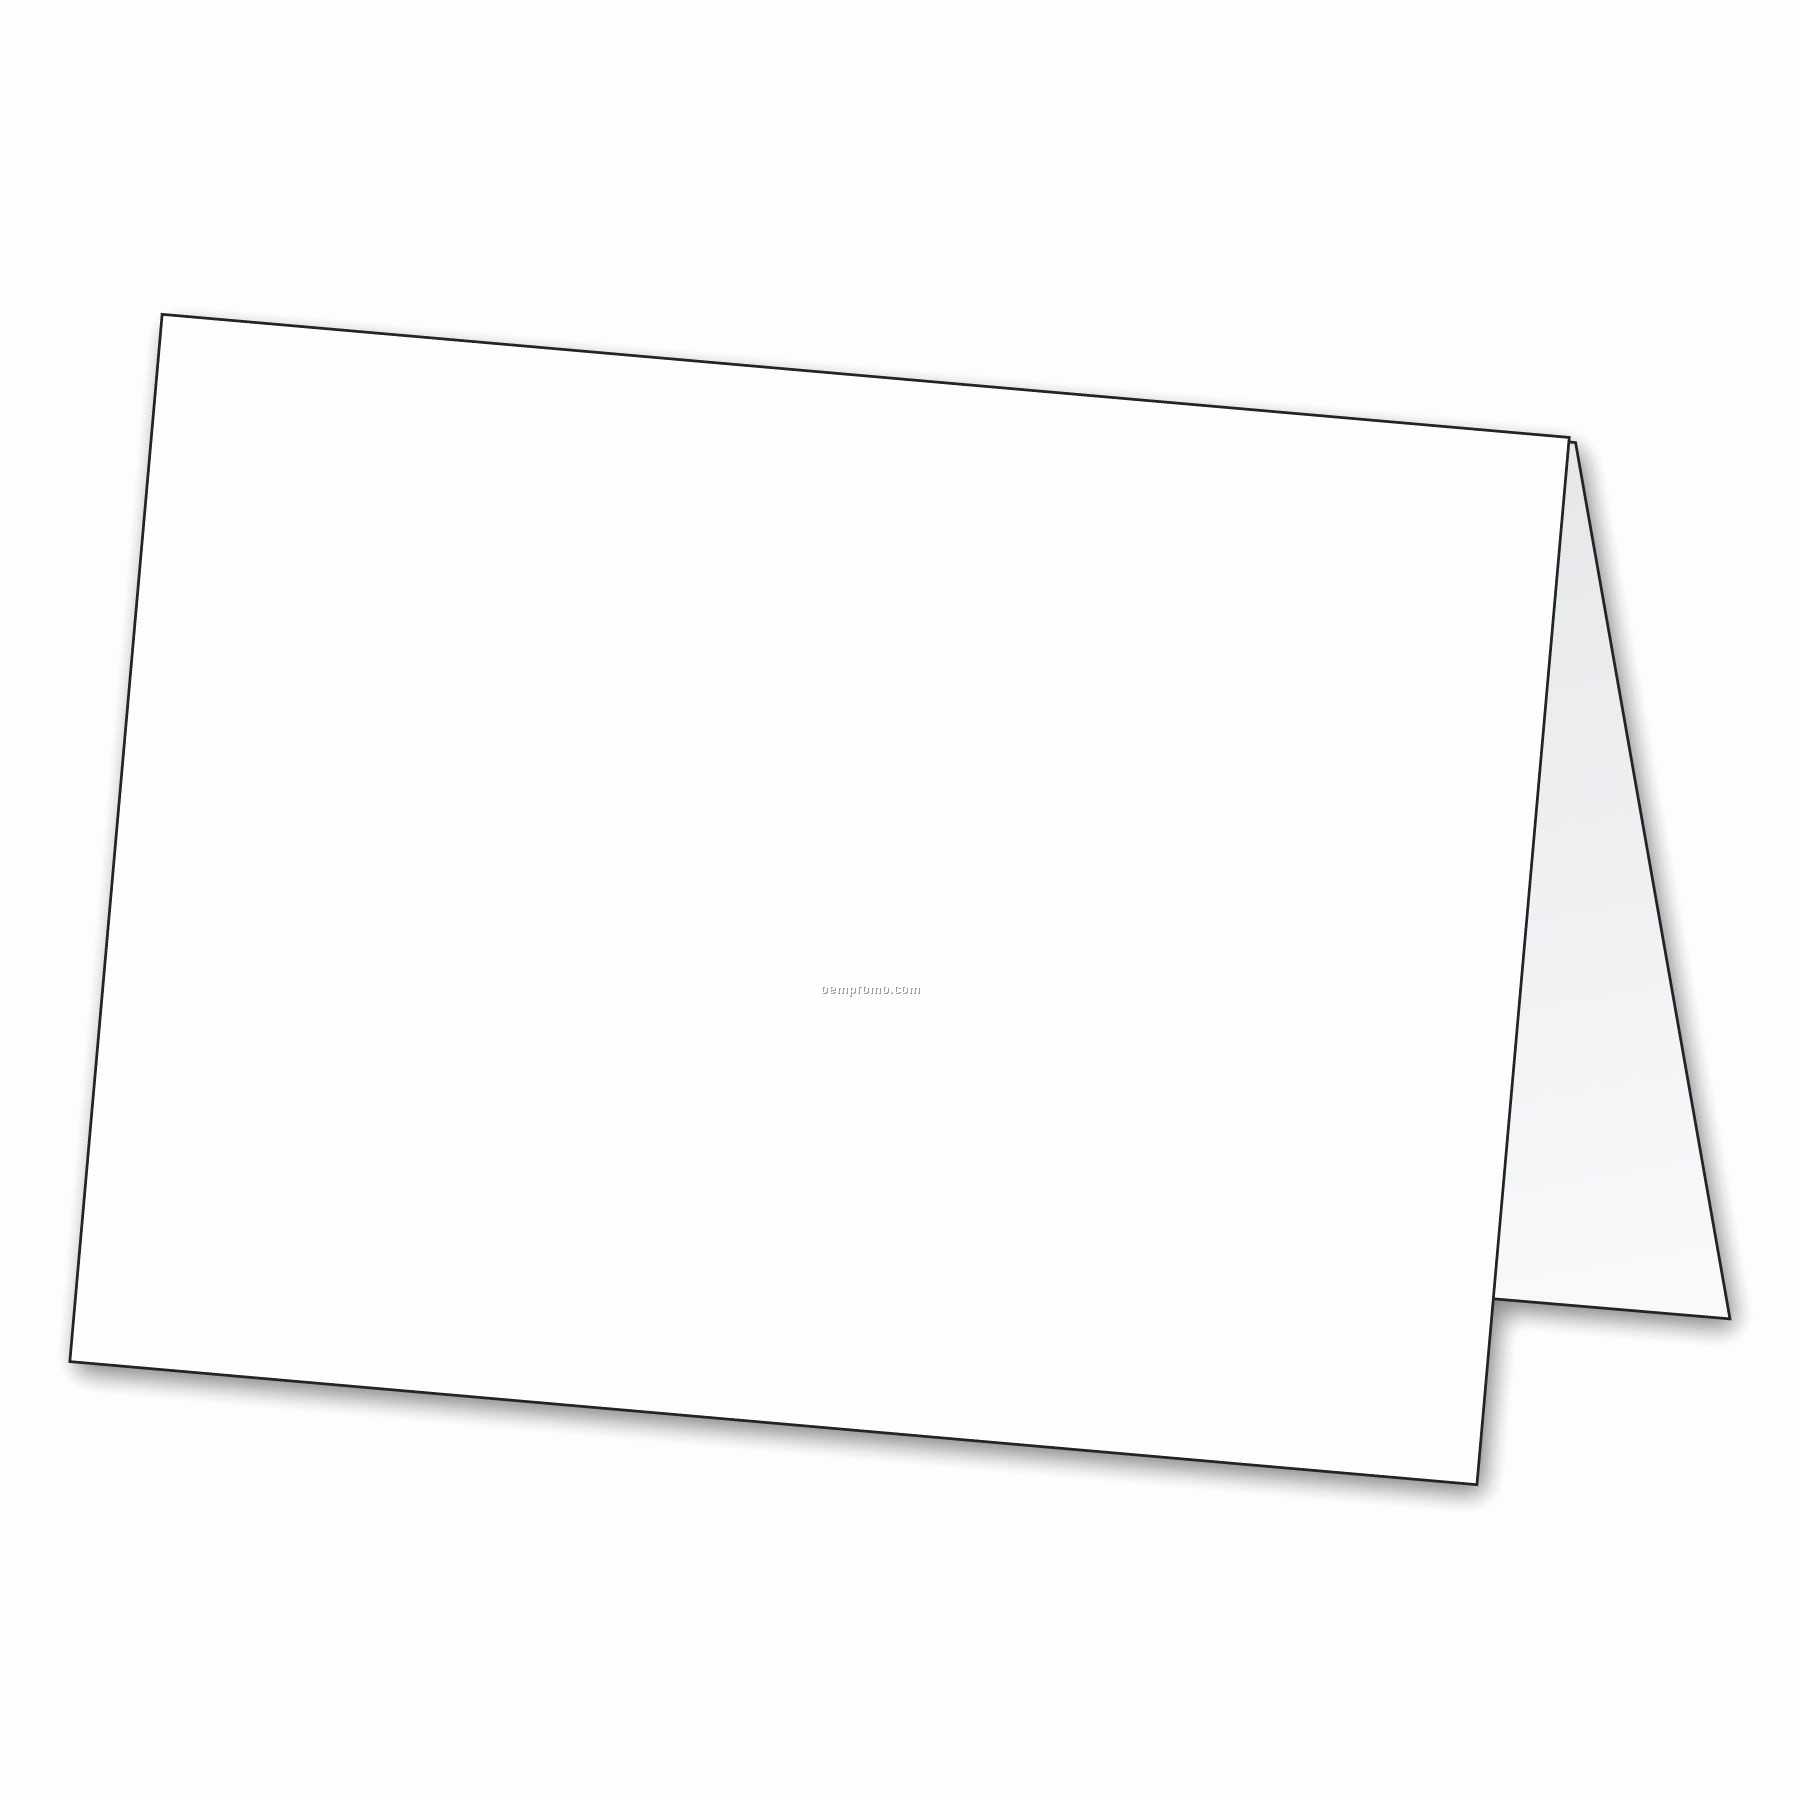 Blank Place Card Template Word Unique Name Tent Template to Pin On Pinterest Pinsdaddy